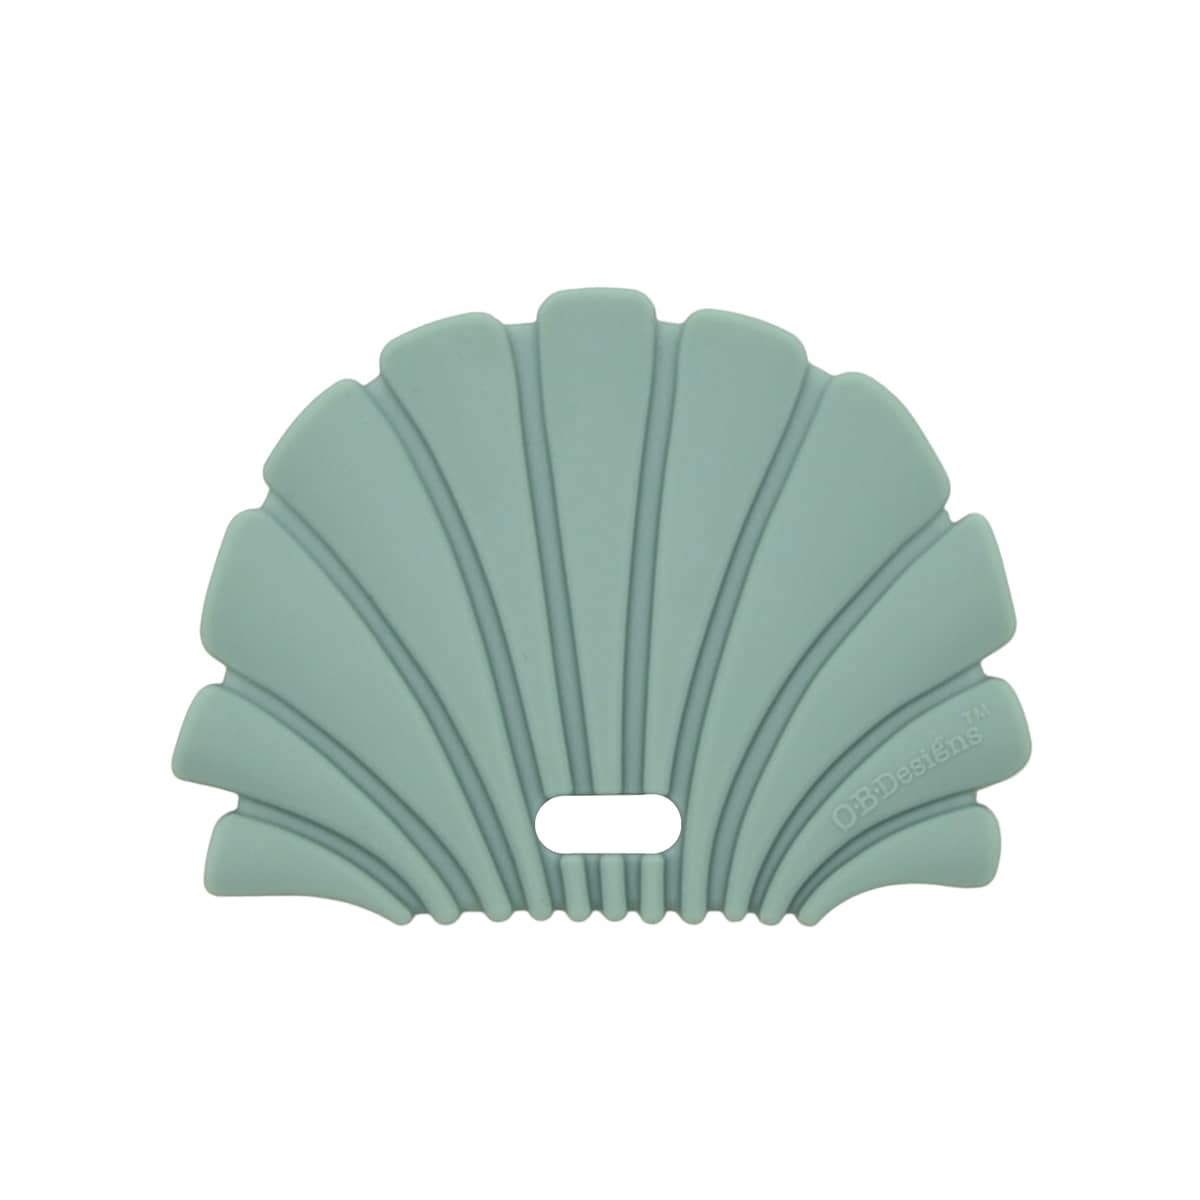 OB Designs Silicone Shell Teether - Ocean